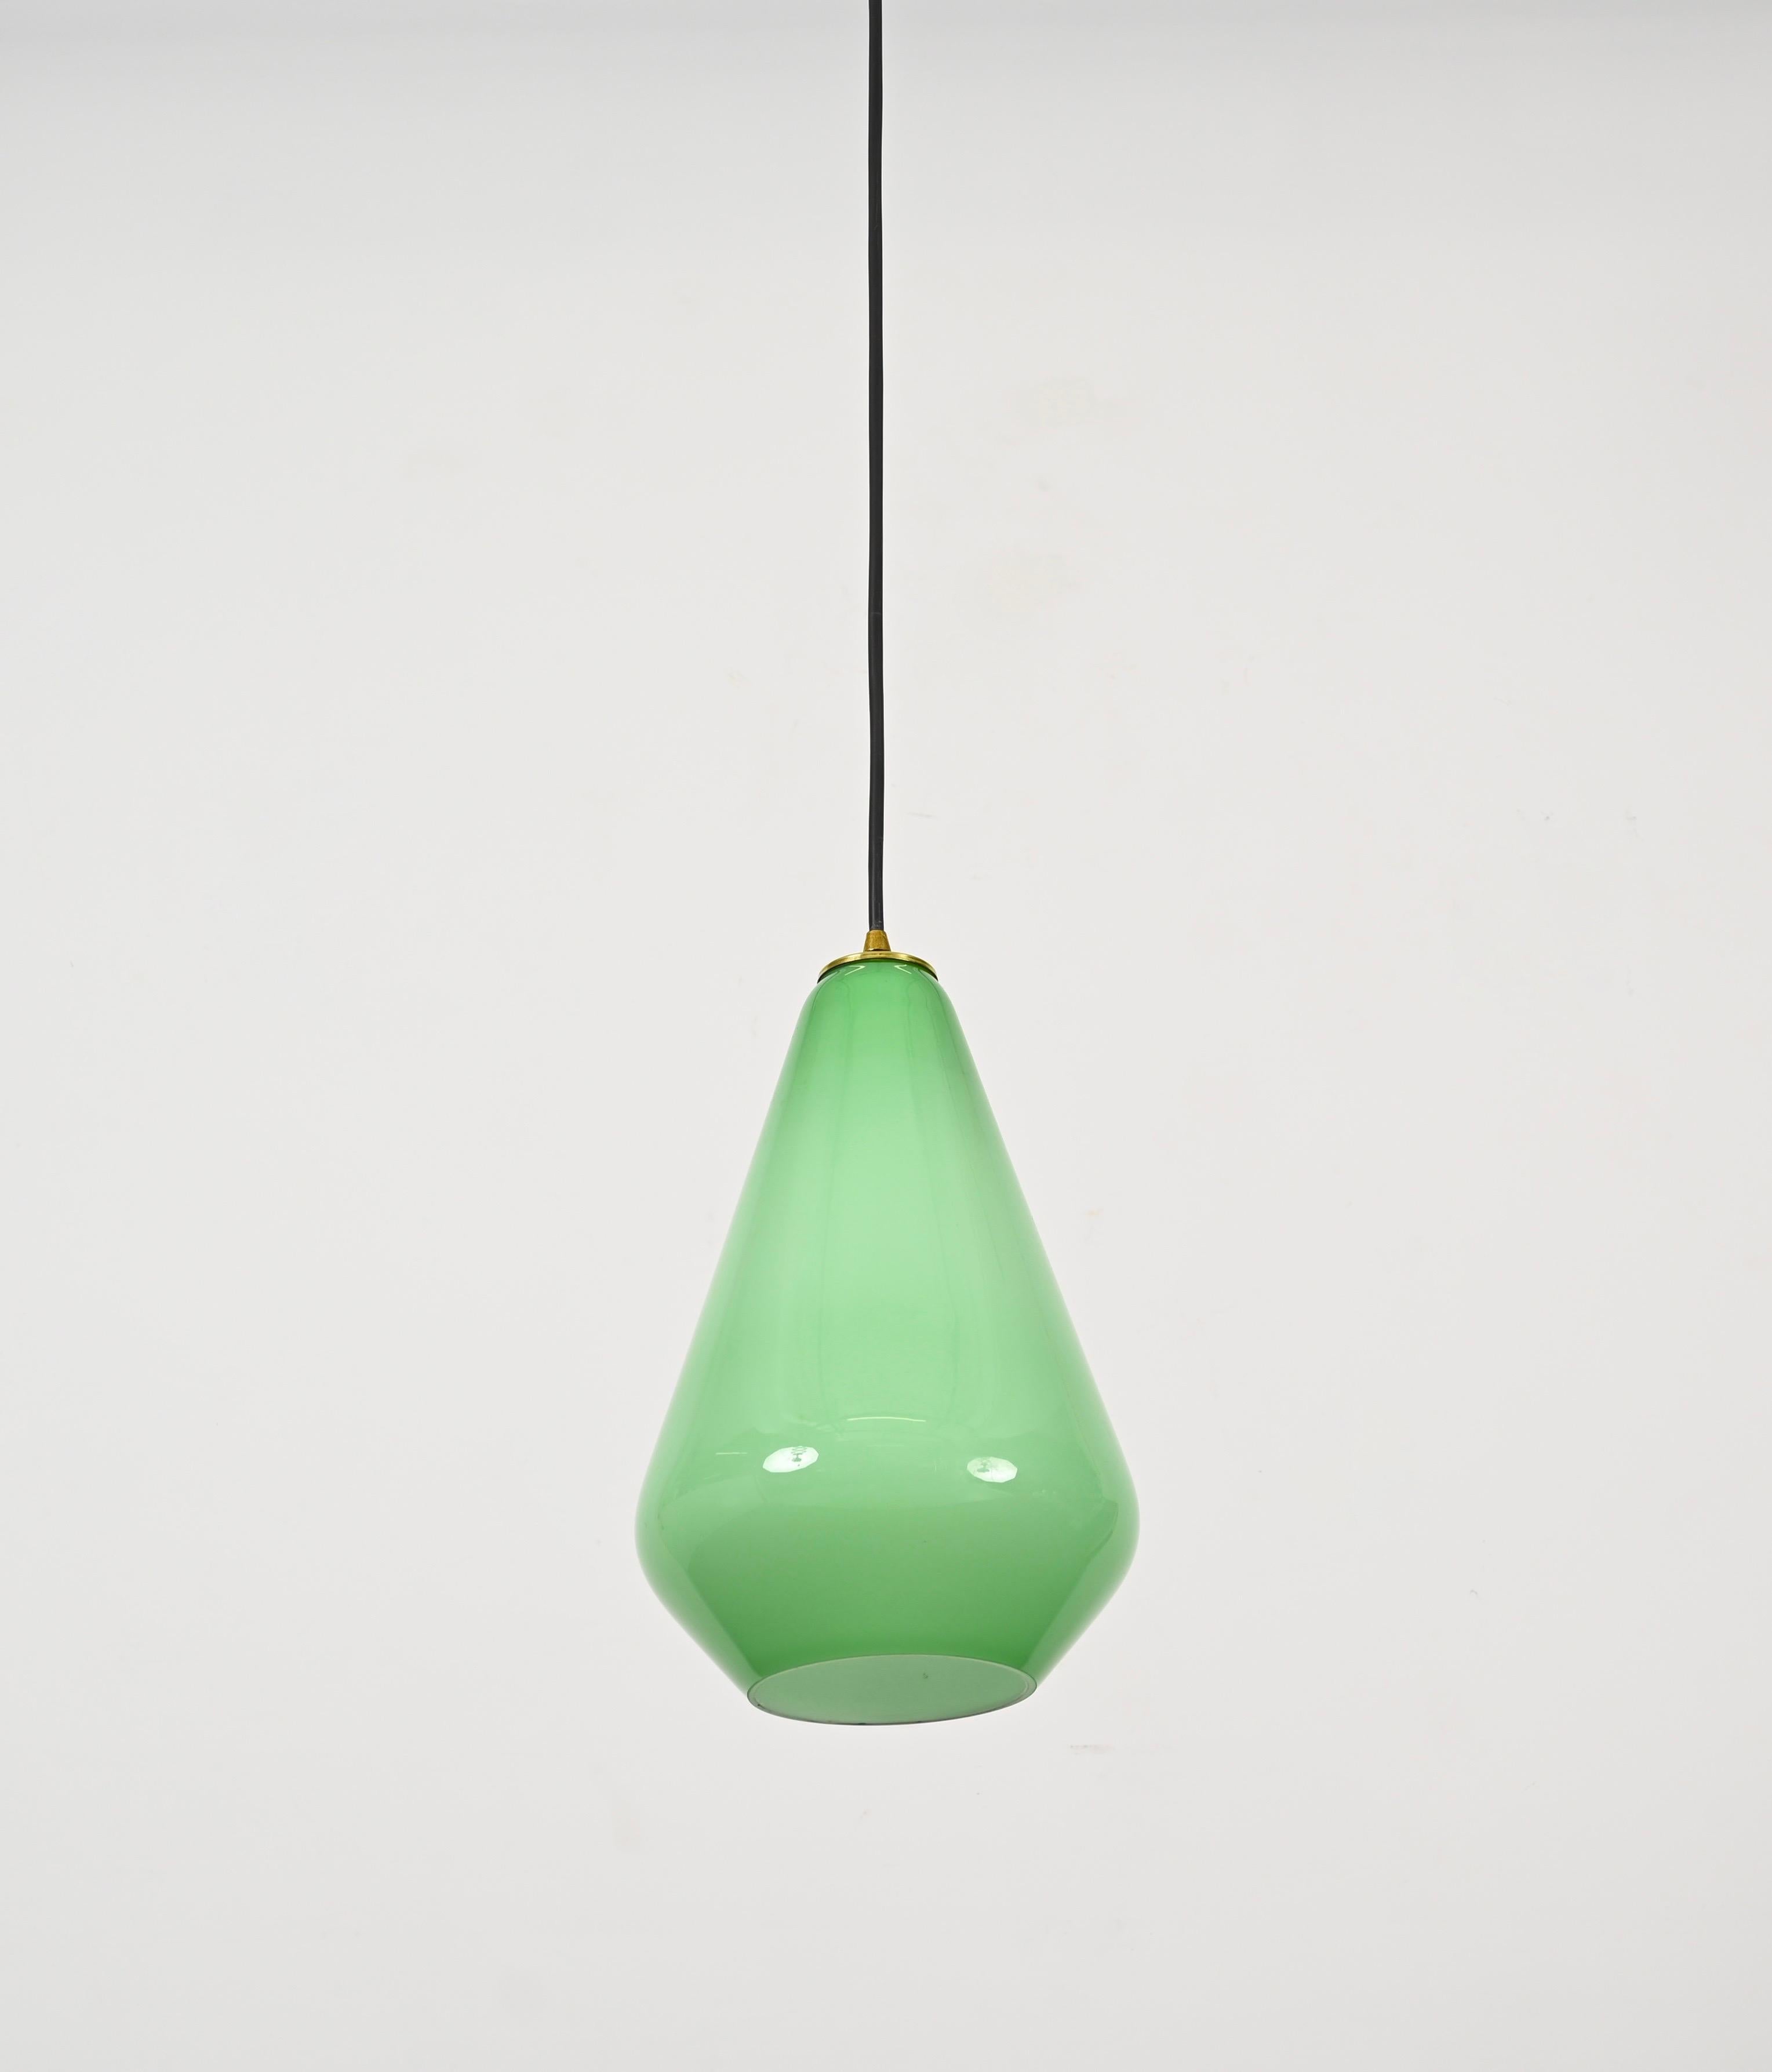 Stunning Italian Murano pendant with a wonderful layered green glass lampshade. This lovely object was designed by Stilnovo in Italy in the 1950s.

The pendant is completely original, in perfect condition without chips or scratches. It features a